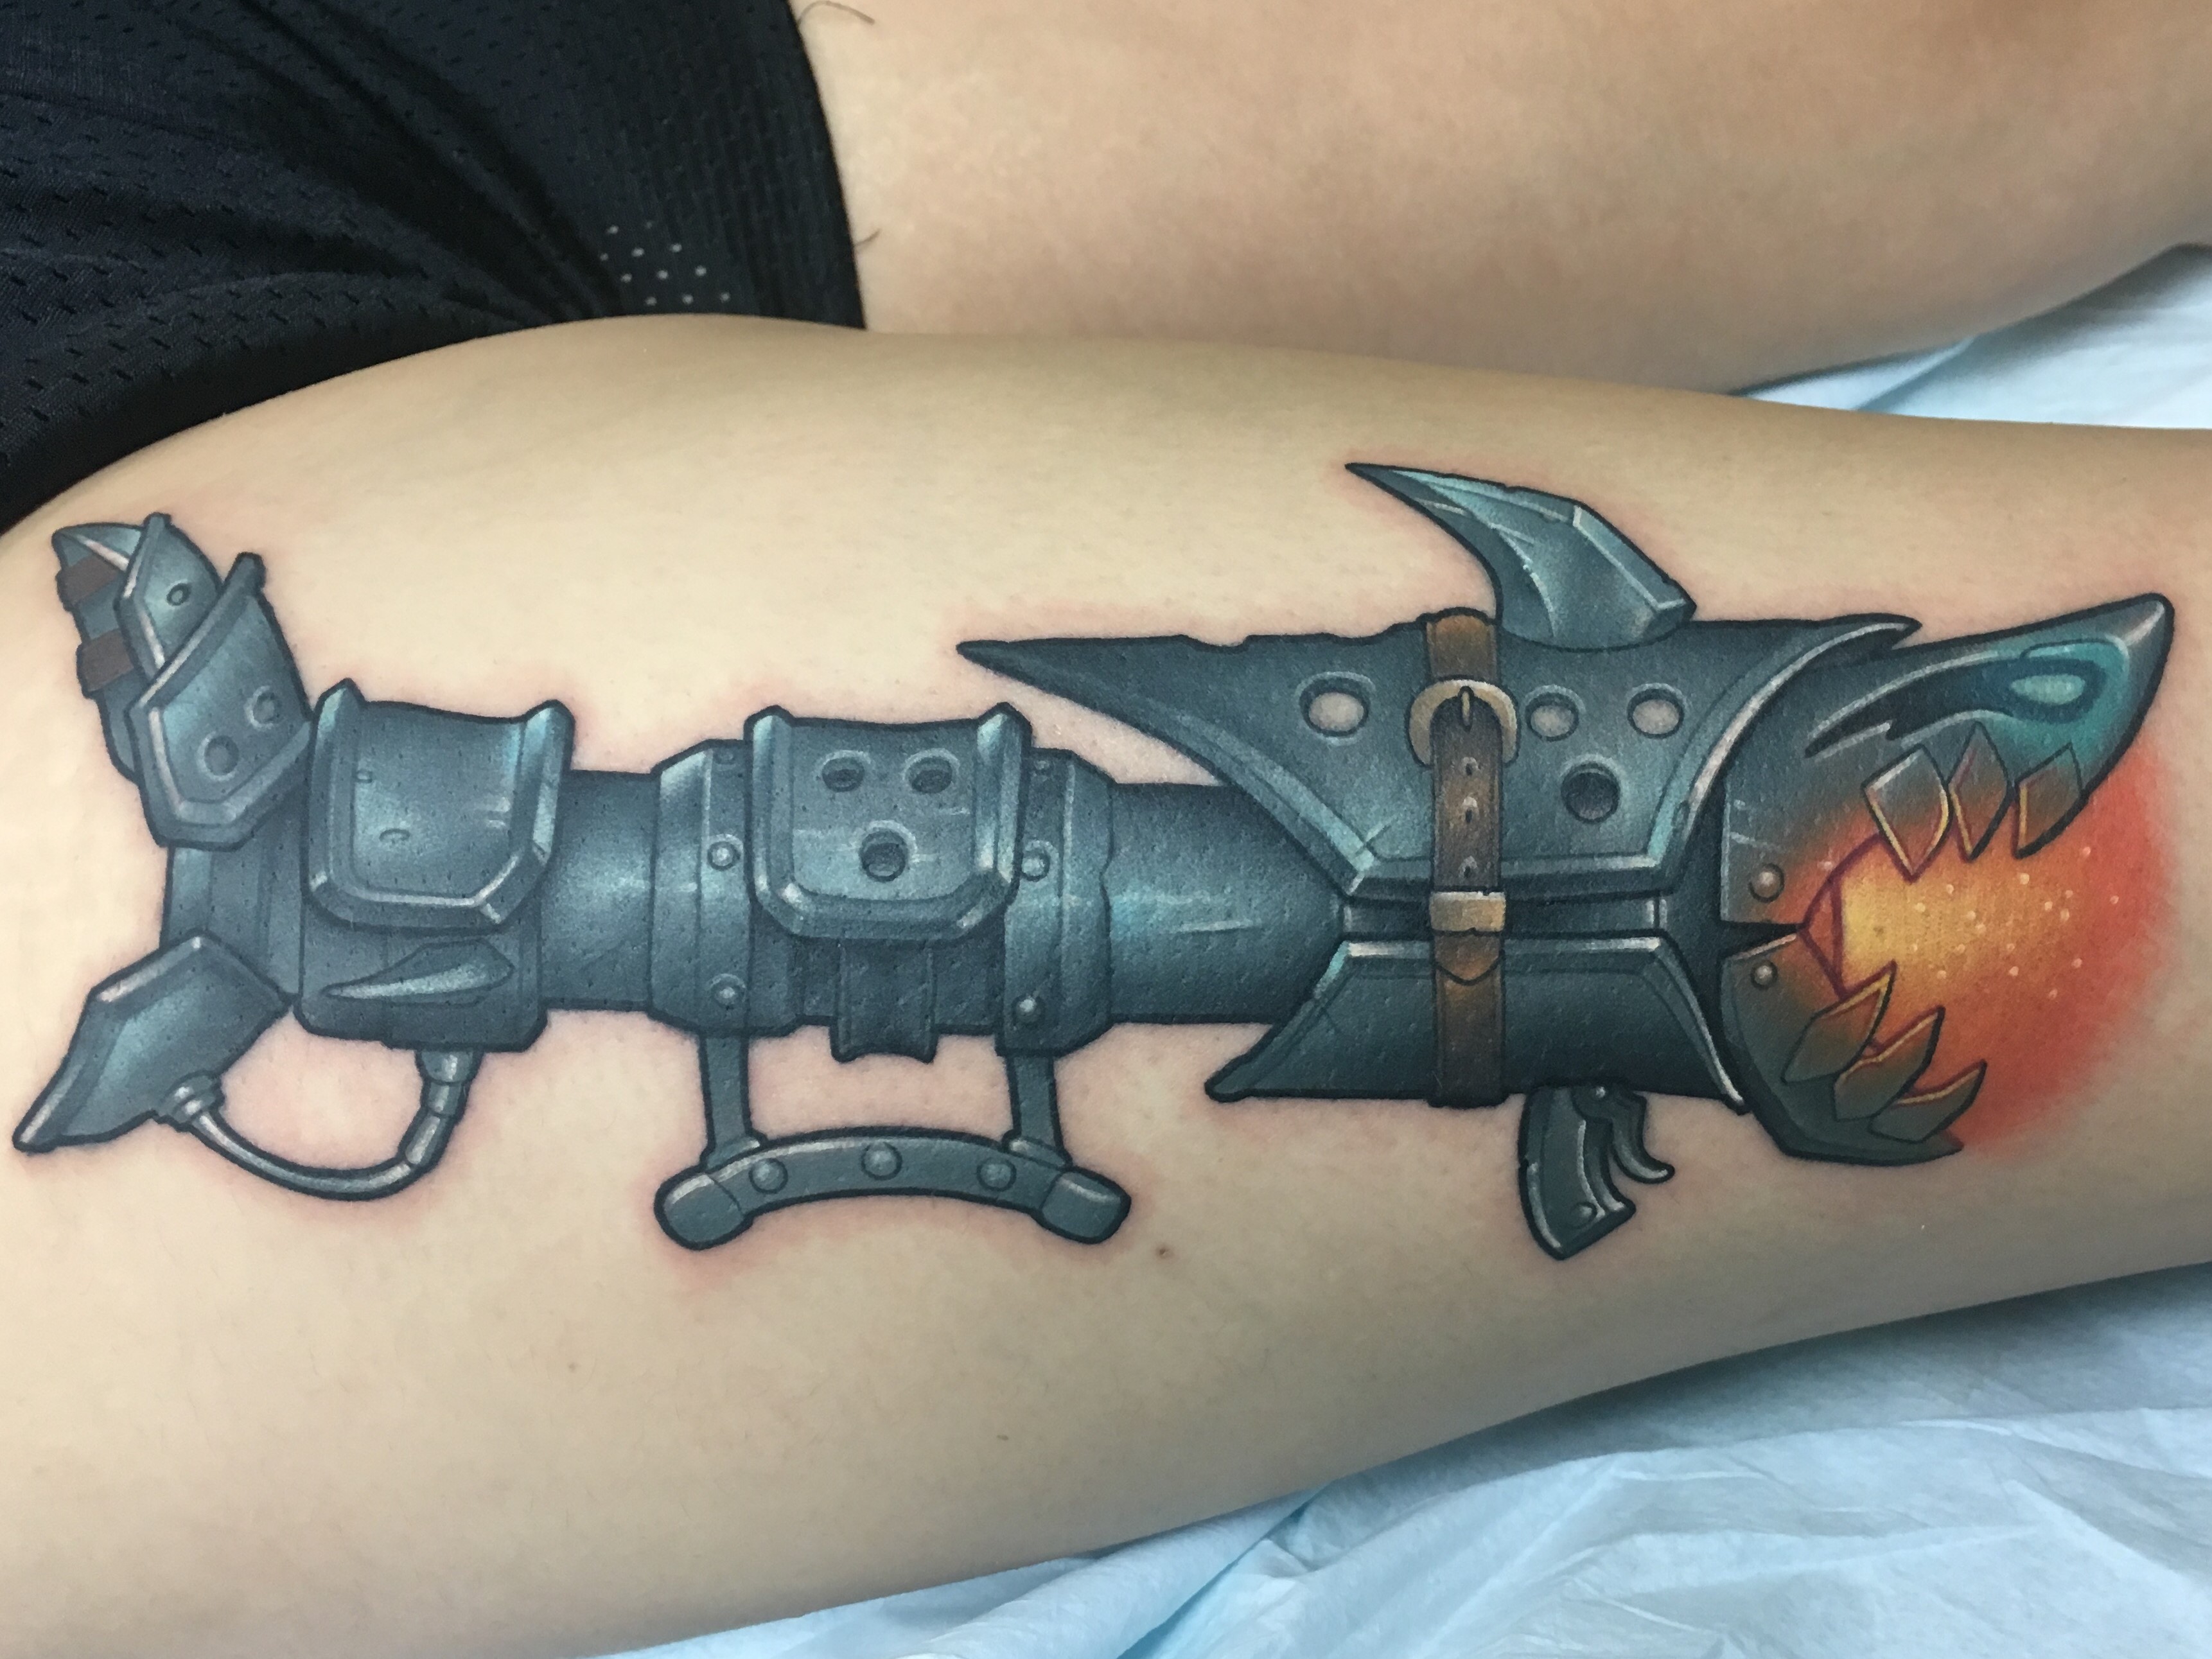 Jinx League of Legends Video Game Tattoo for a Gamer by Cracker Joe Swider in Connecticut